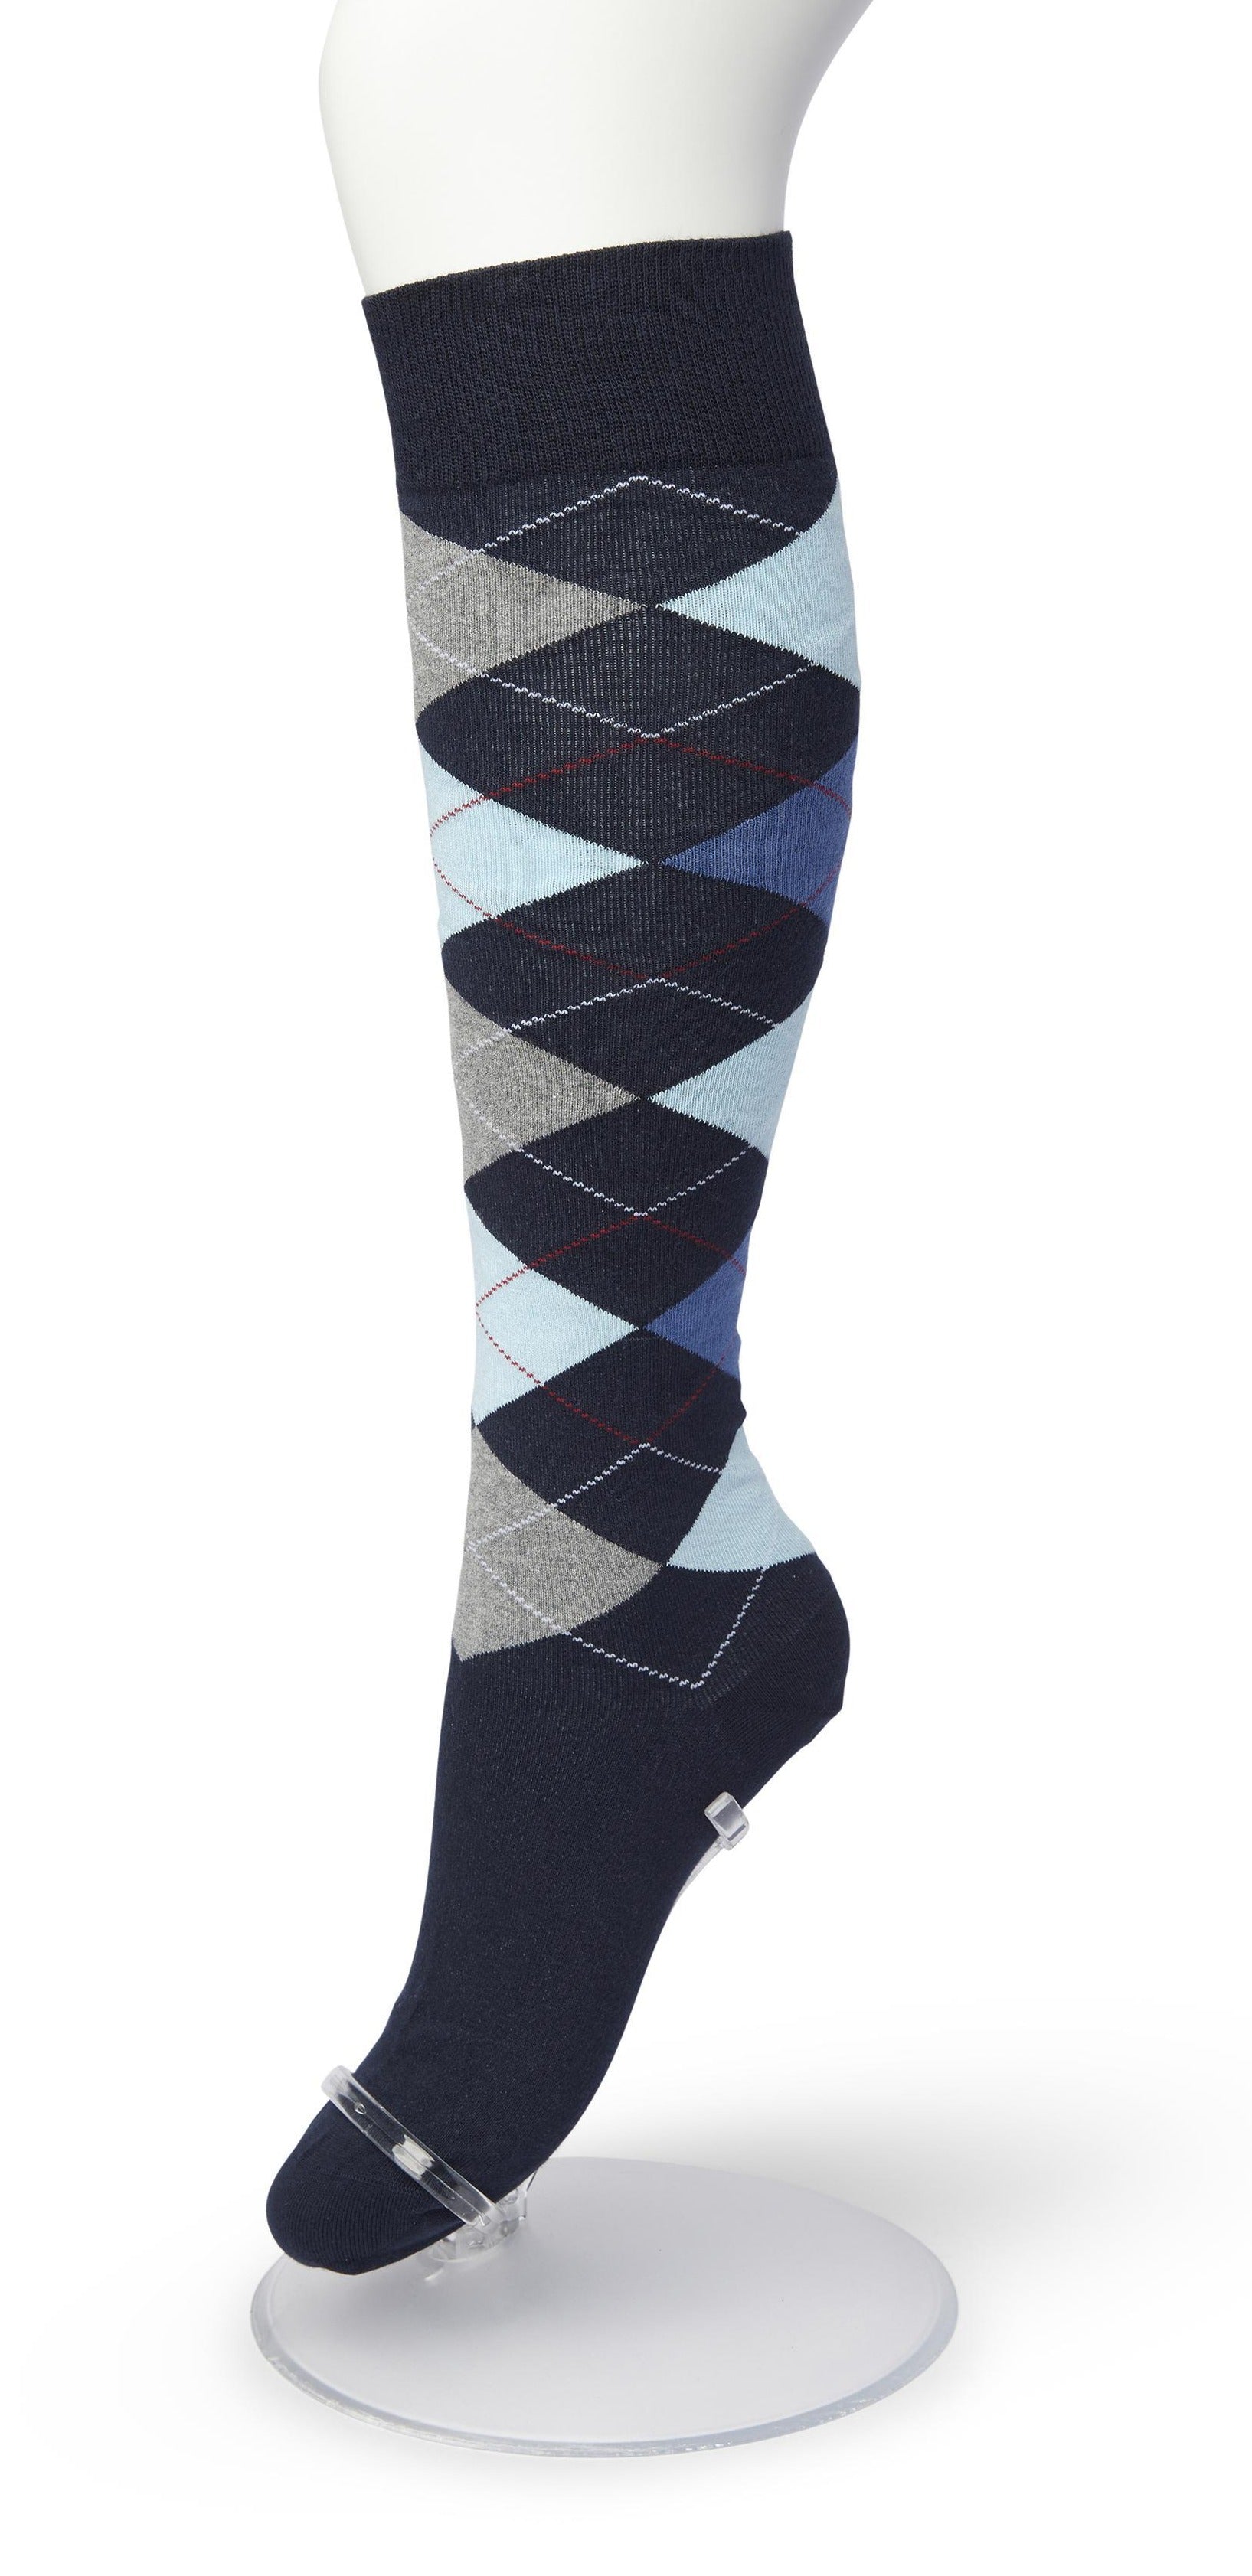 Bonnie Doon BP211505 Argyle Knee-highs - Golf style knee-high socks with a diamond argyle tartan check pattern in navy, blue, light baby blue and red.